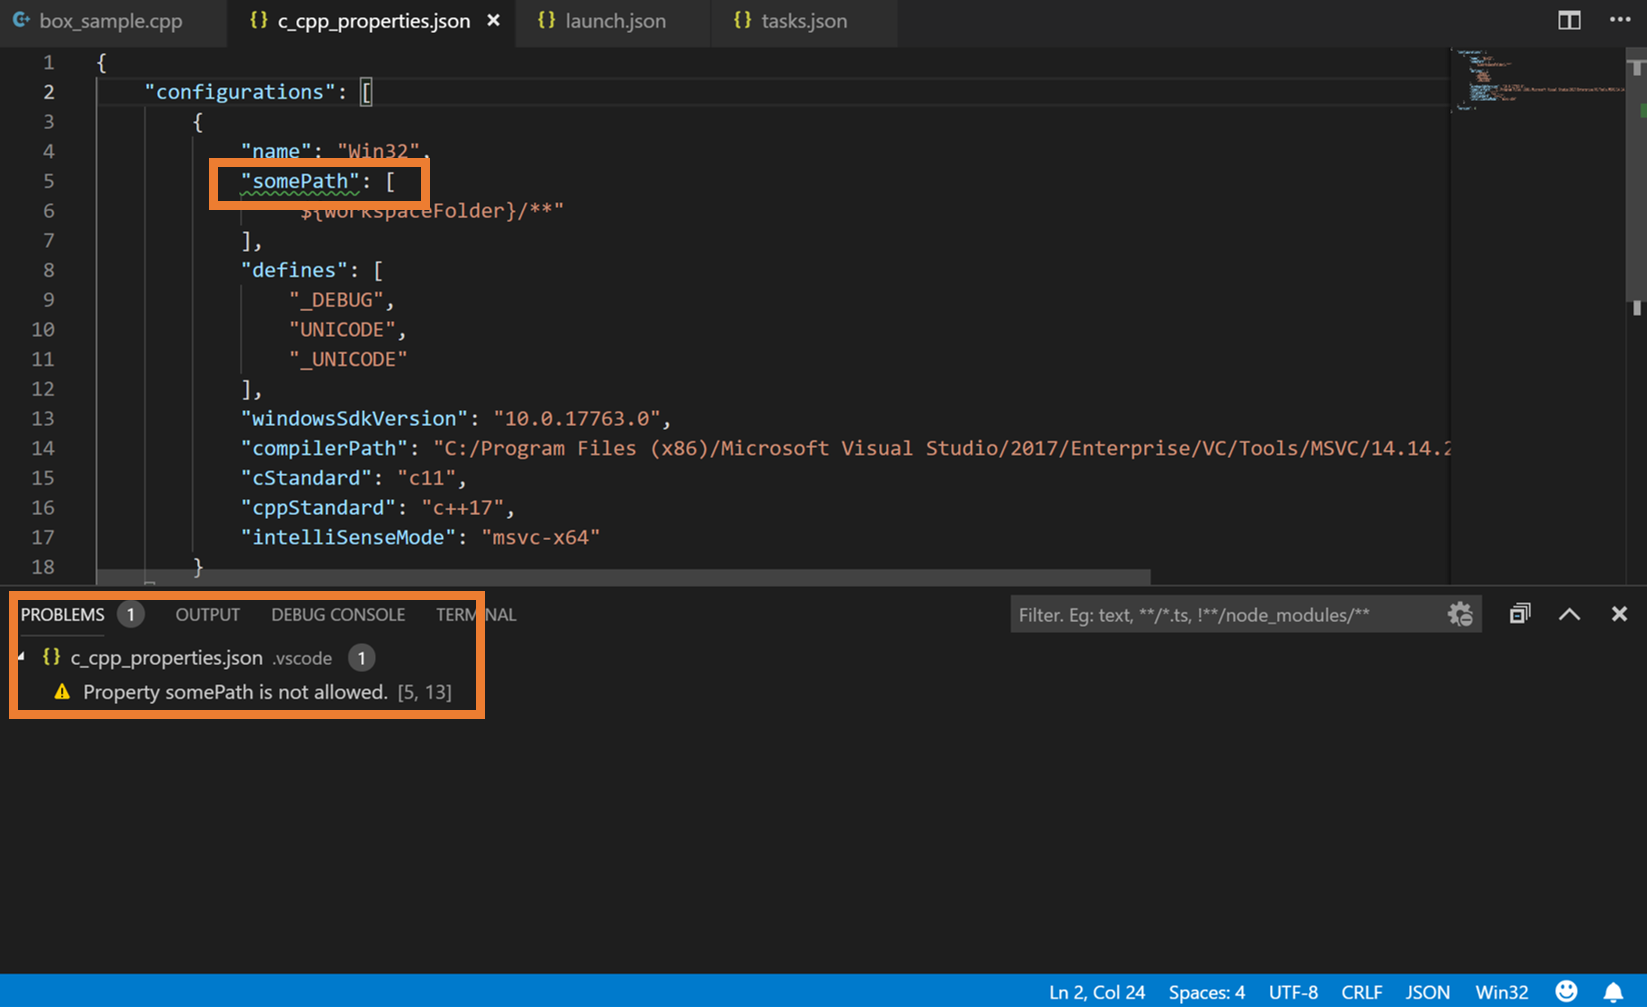 how to use visual studio code for c